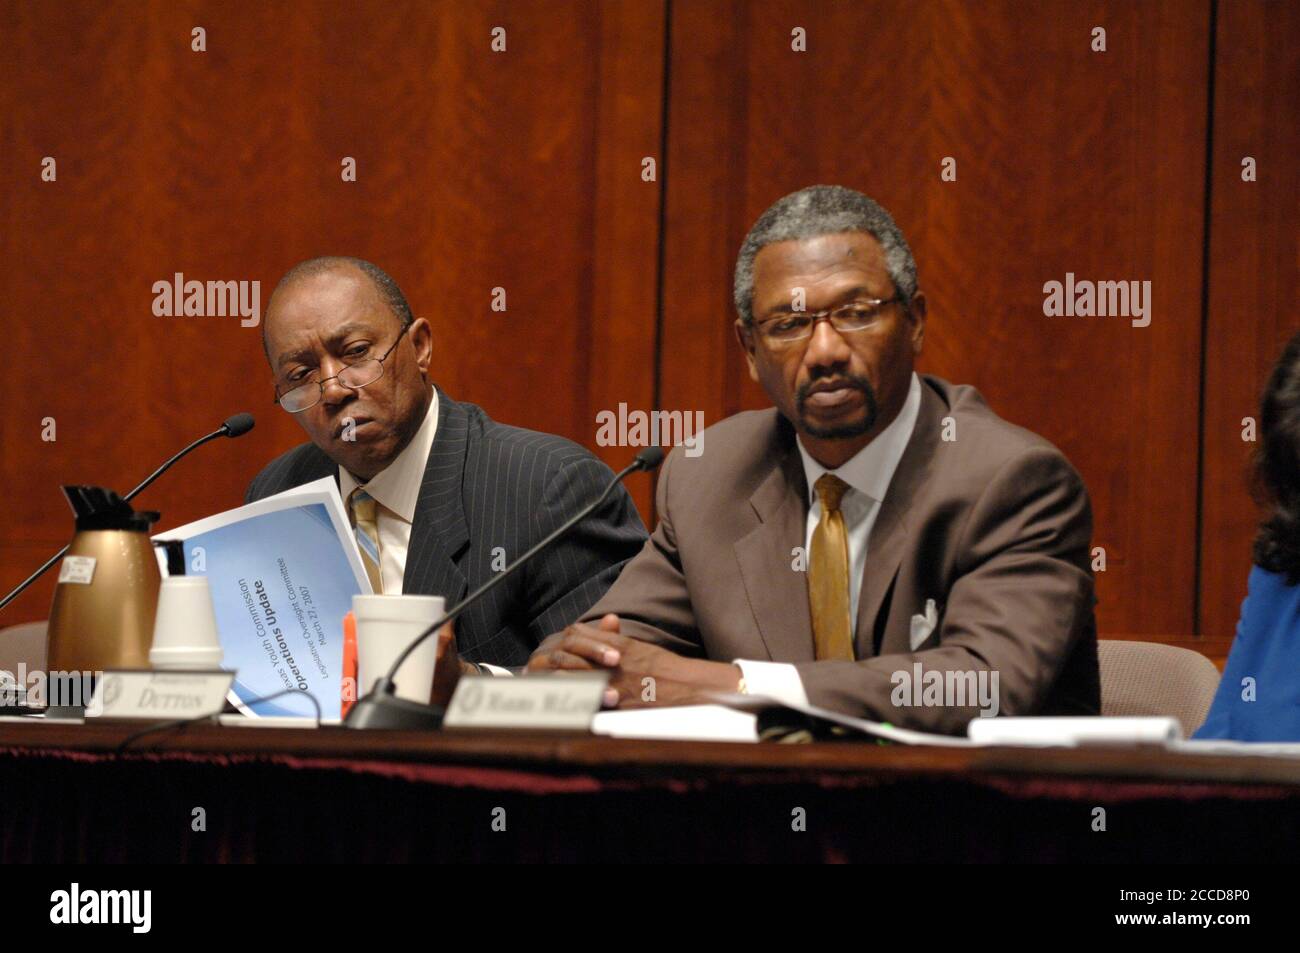 Austin, Texas USA, March 27, 2007: Texas House of Representatives members Sylvester Turner (left) and Harold Dutton Jr. during meeting of the Joint Committee on the Operation and Management of the Texas Youth Commission. ©Marjorie Cotera / Daemmrich Photography Stock Photo